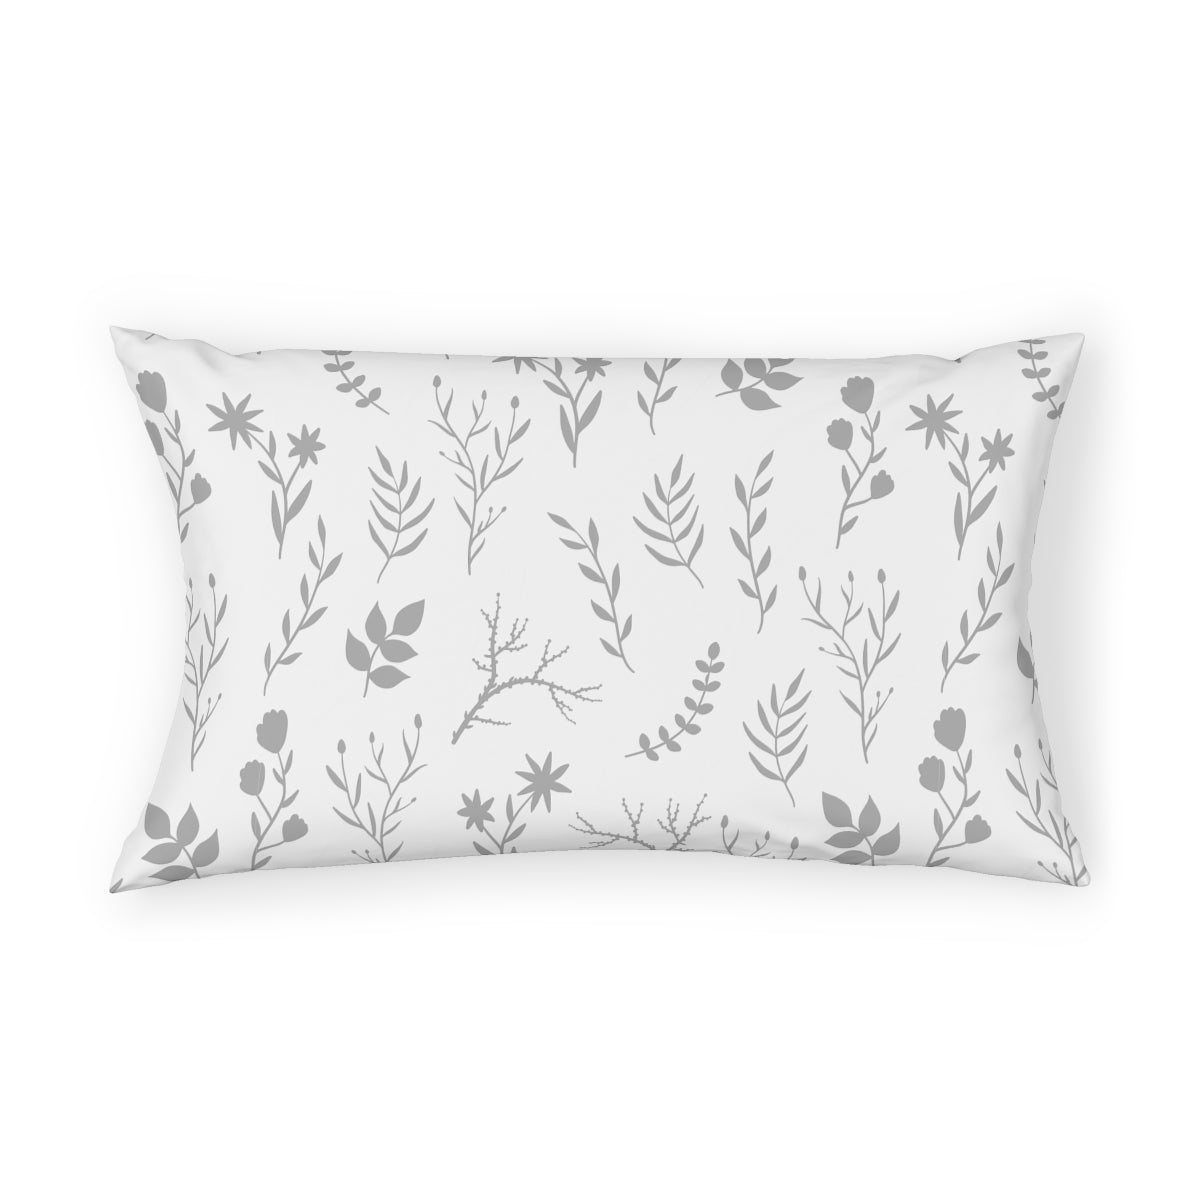 Modern floral print pillowcases, designed exclusively by Home Stitchery Decor. Part of a mix and match collection of modern farmhouse home decor. 10 color options to choose from. Redecorate the easy way with casual farmhouse elegant designs. Be sure to check out the Home Stitchery Decor YouTube Channel.